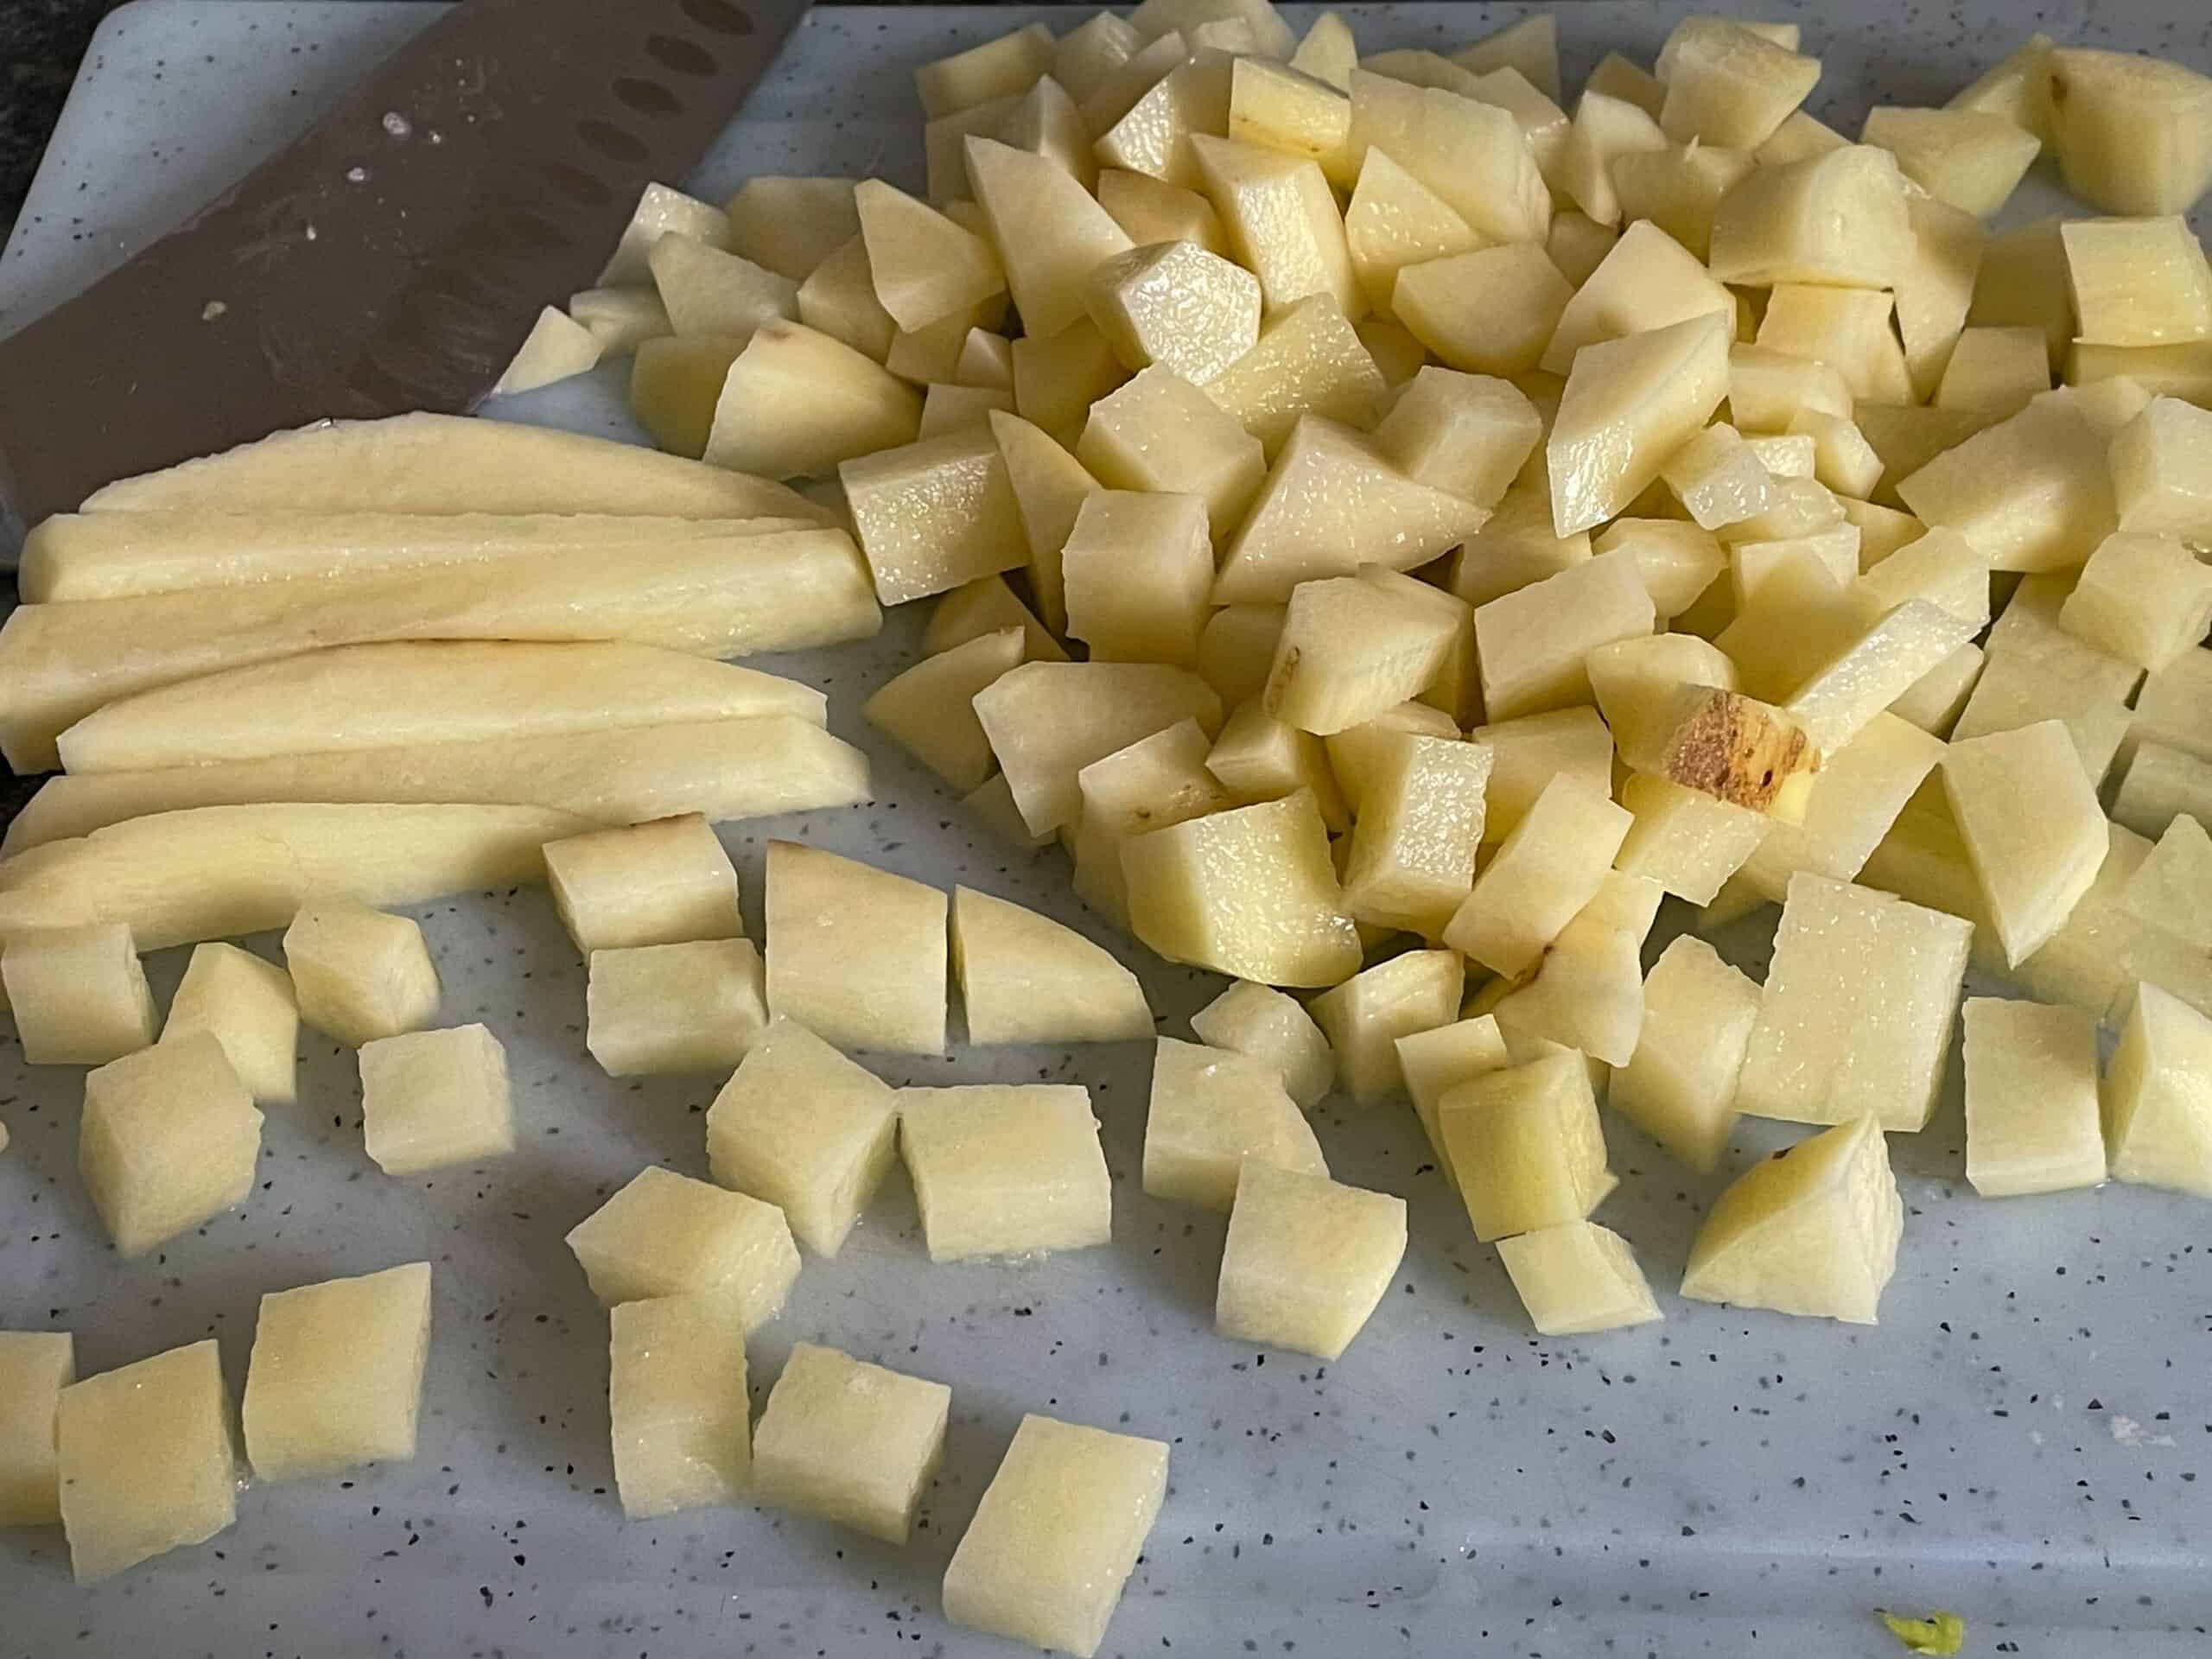 Potatoes chopped into cubes on a chopping board.